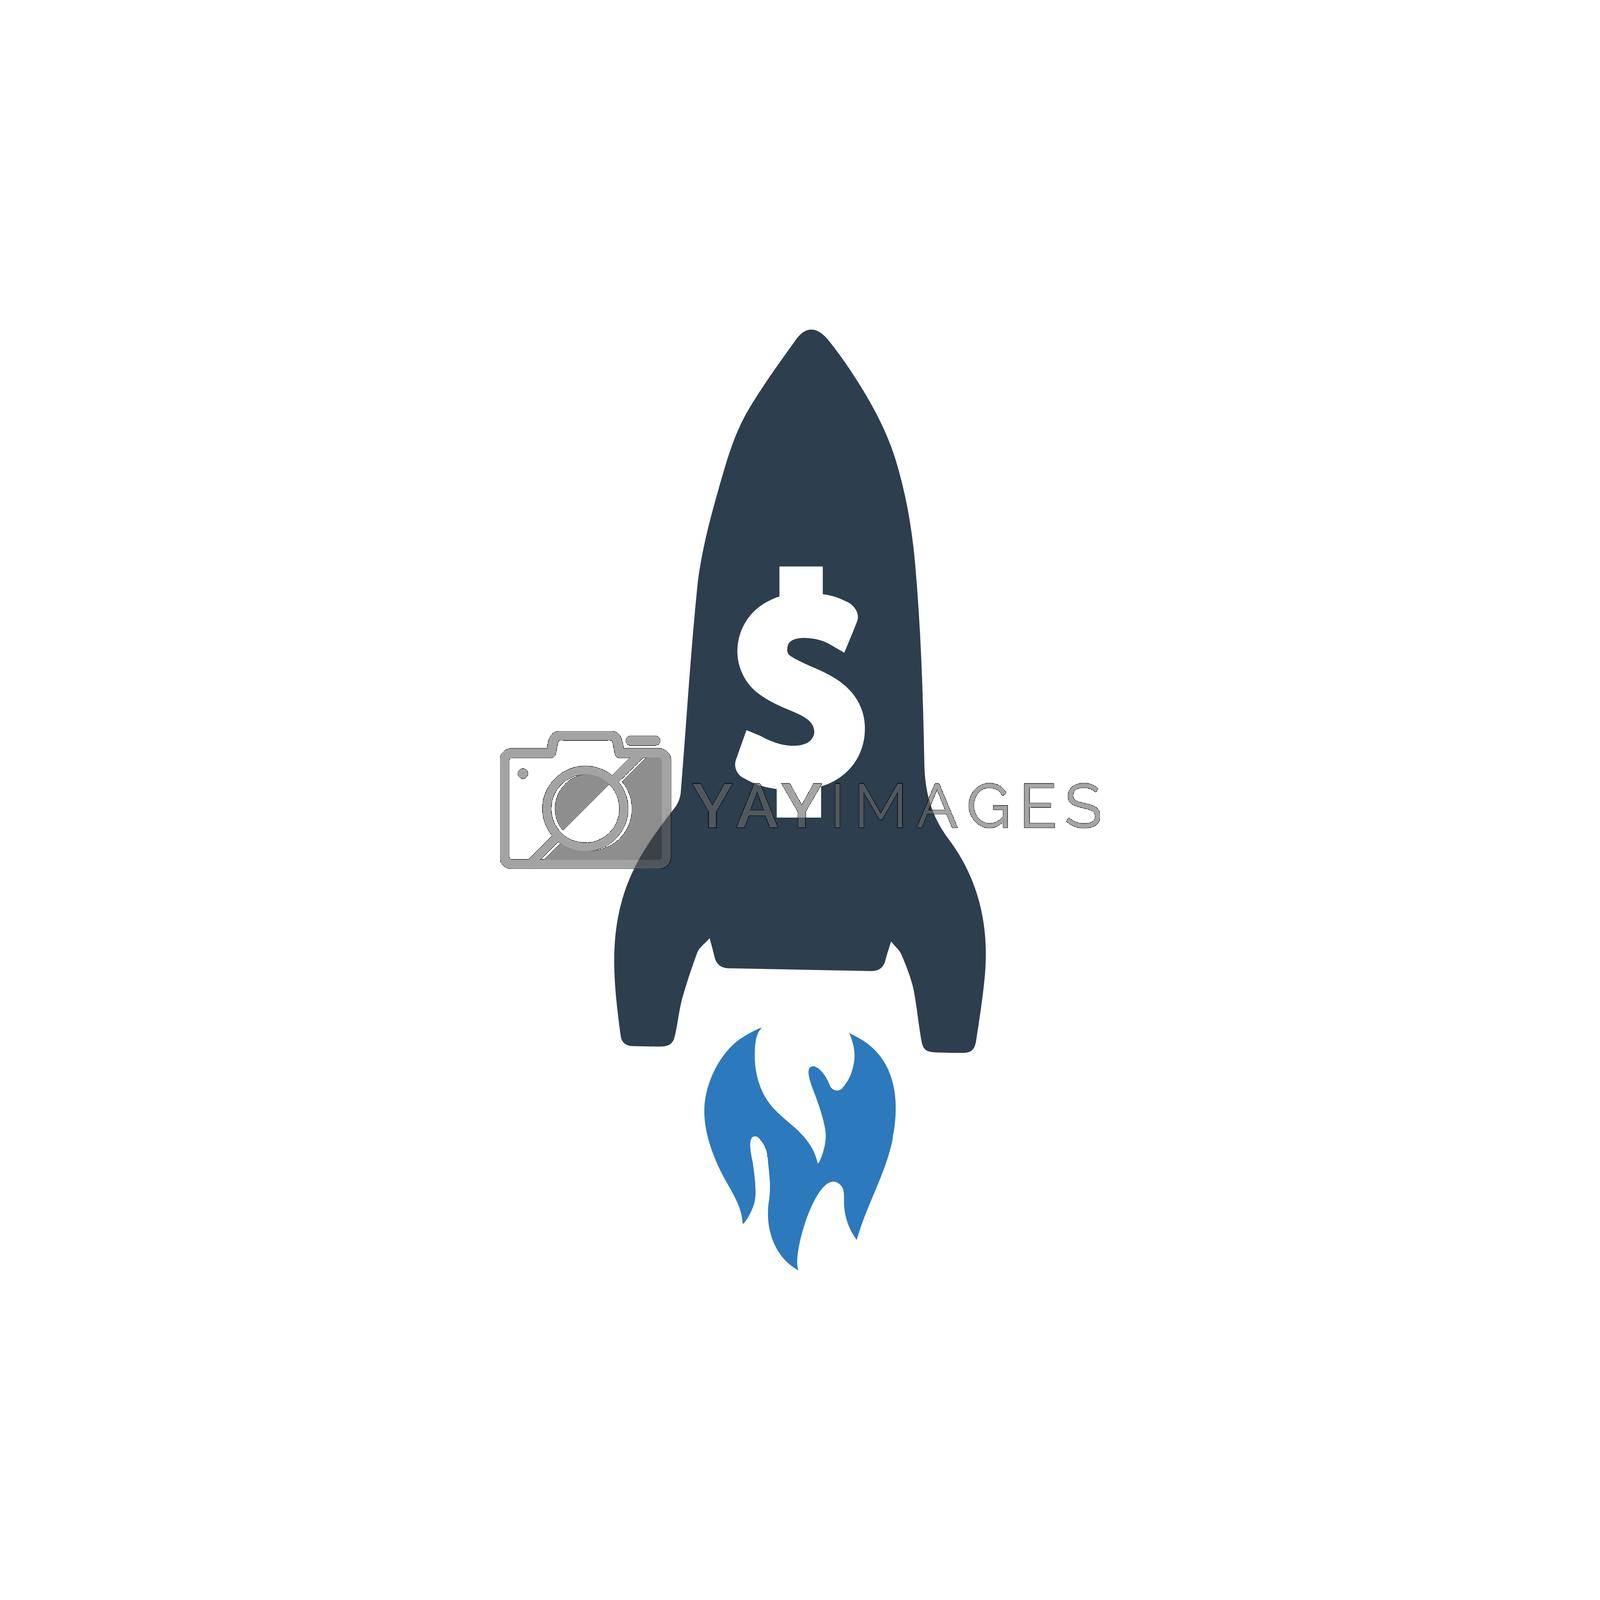 Royalty free image of Financial Project Launch Icon by delwar018